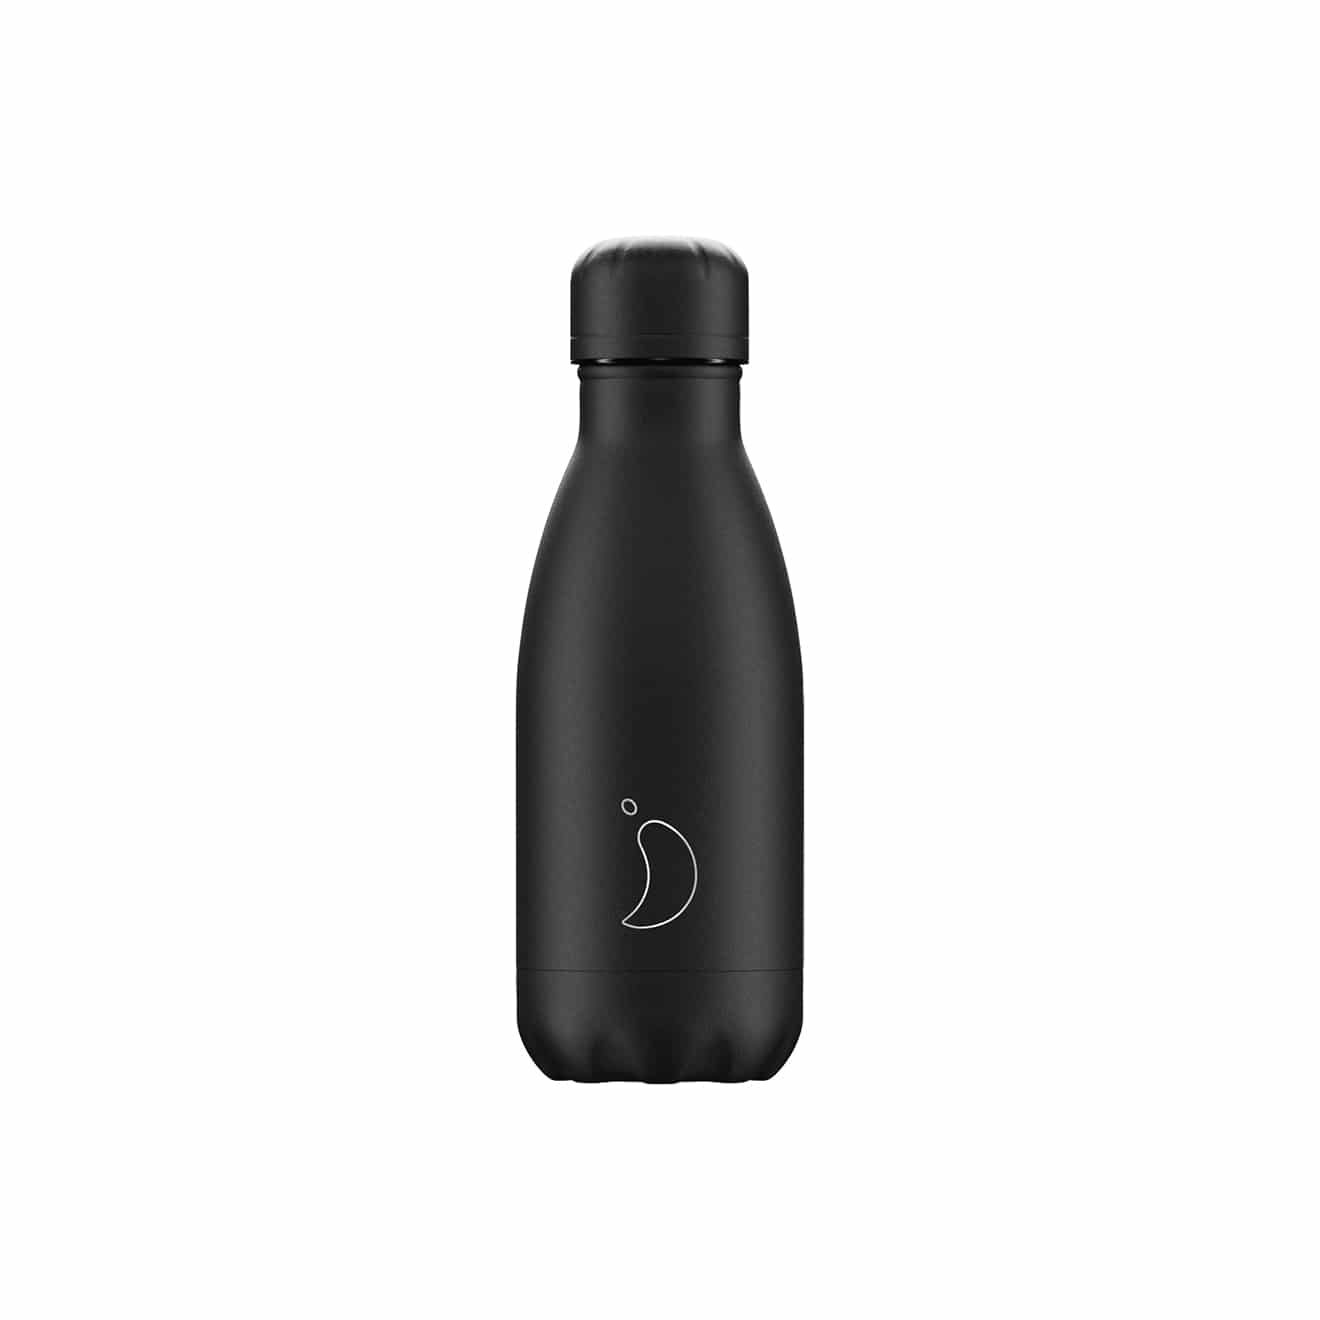 Chilly's bottle Monochrome Edition in All Black 